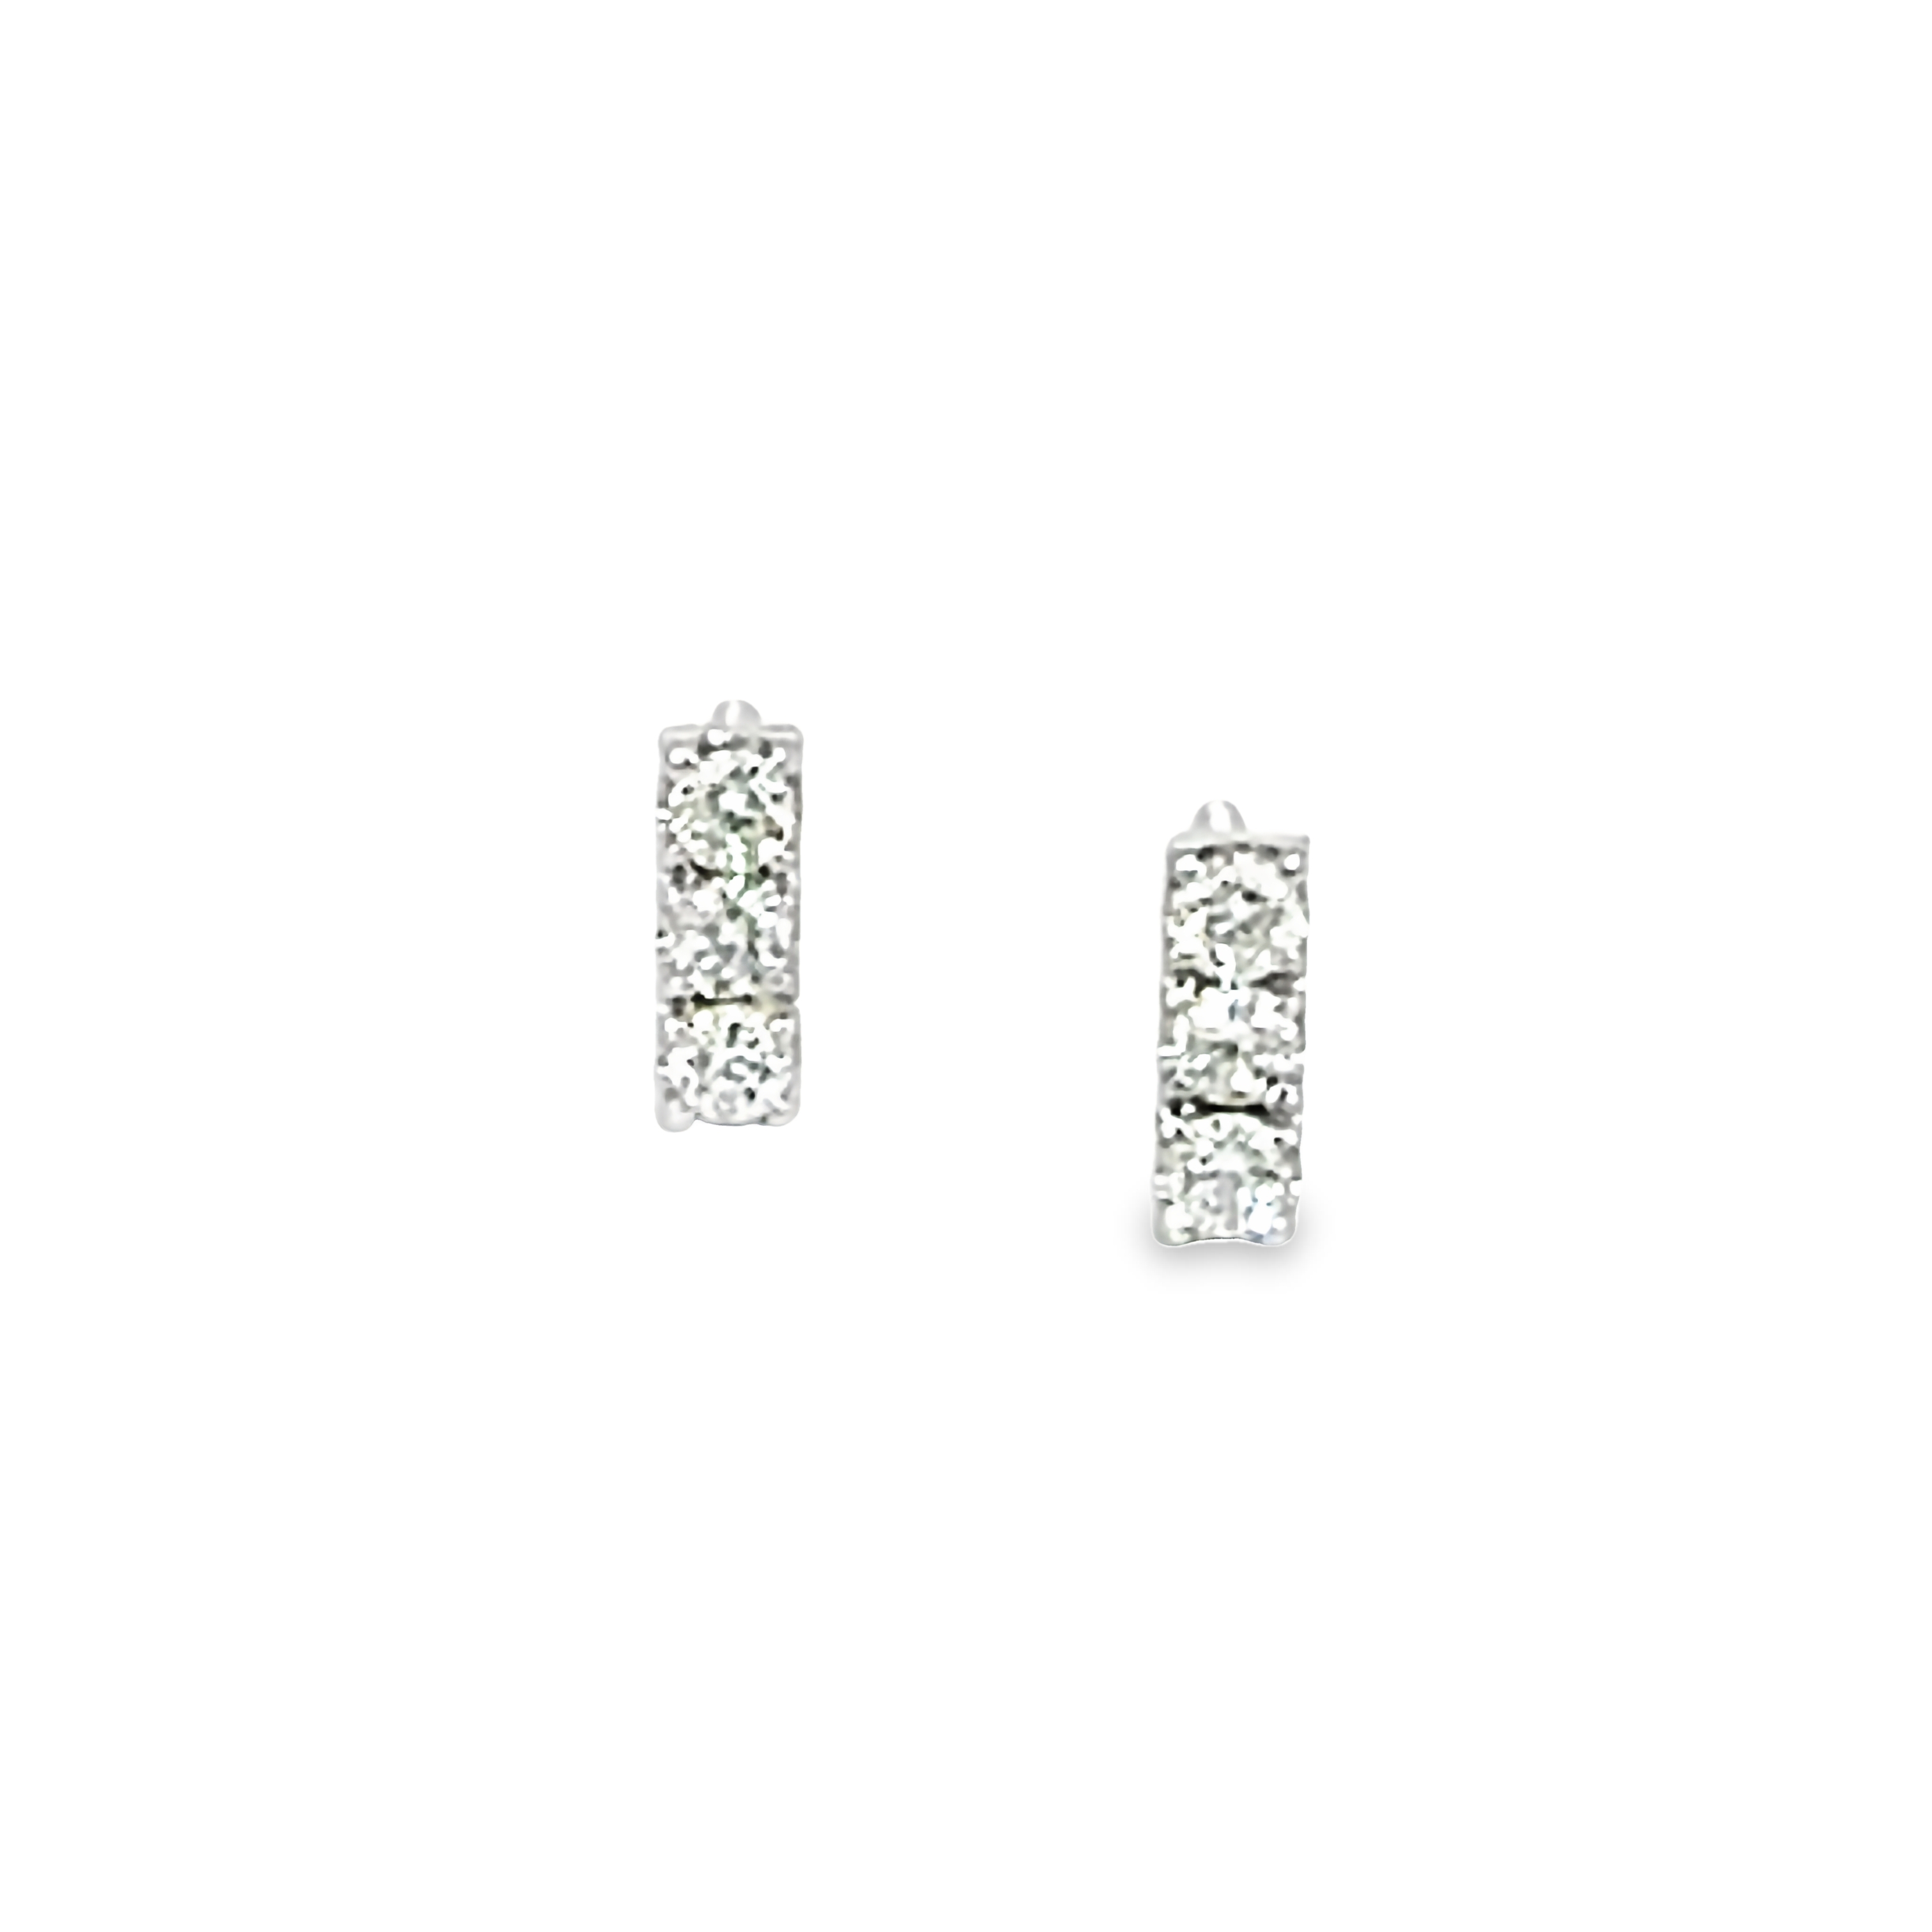 14 Karat white gold three stone stud earrings with 6=0.11 total weight round brilliant G I Diamonds